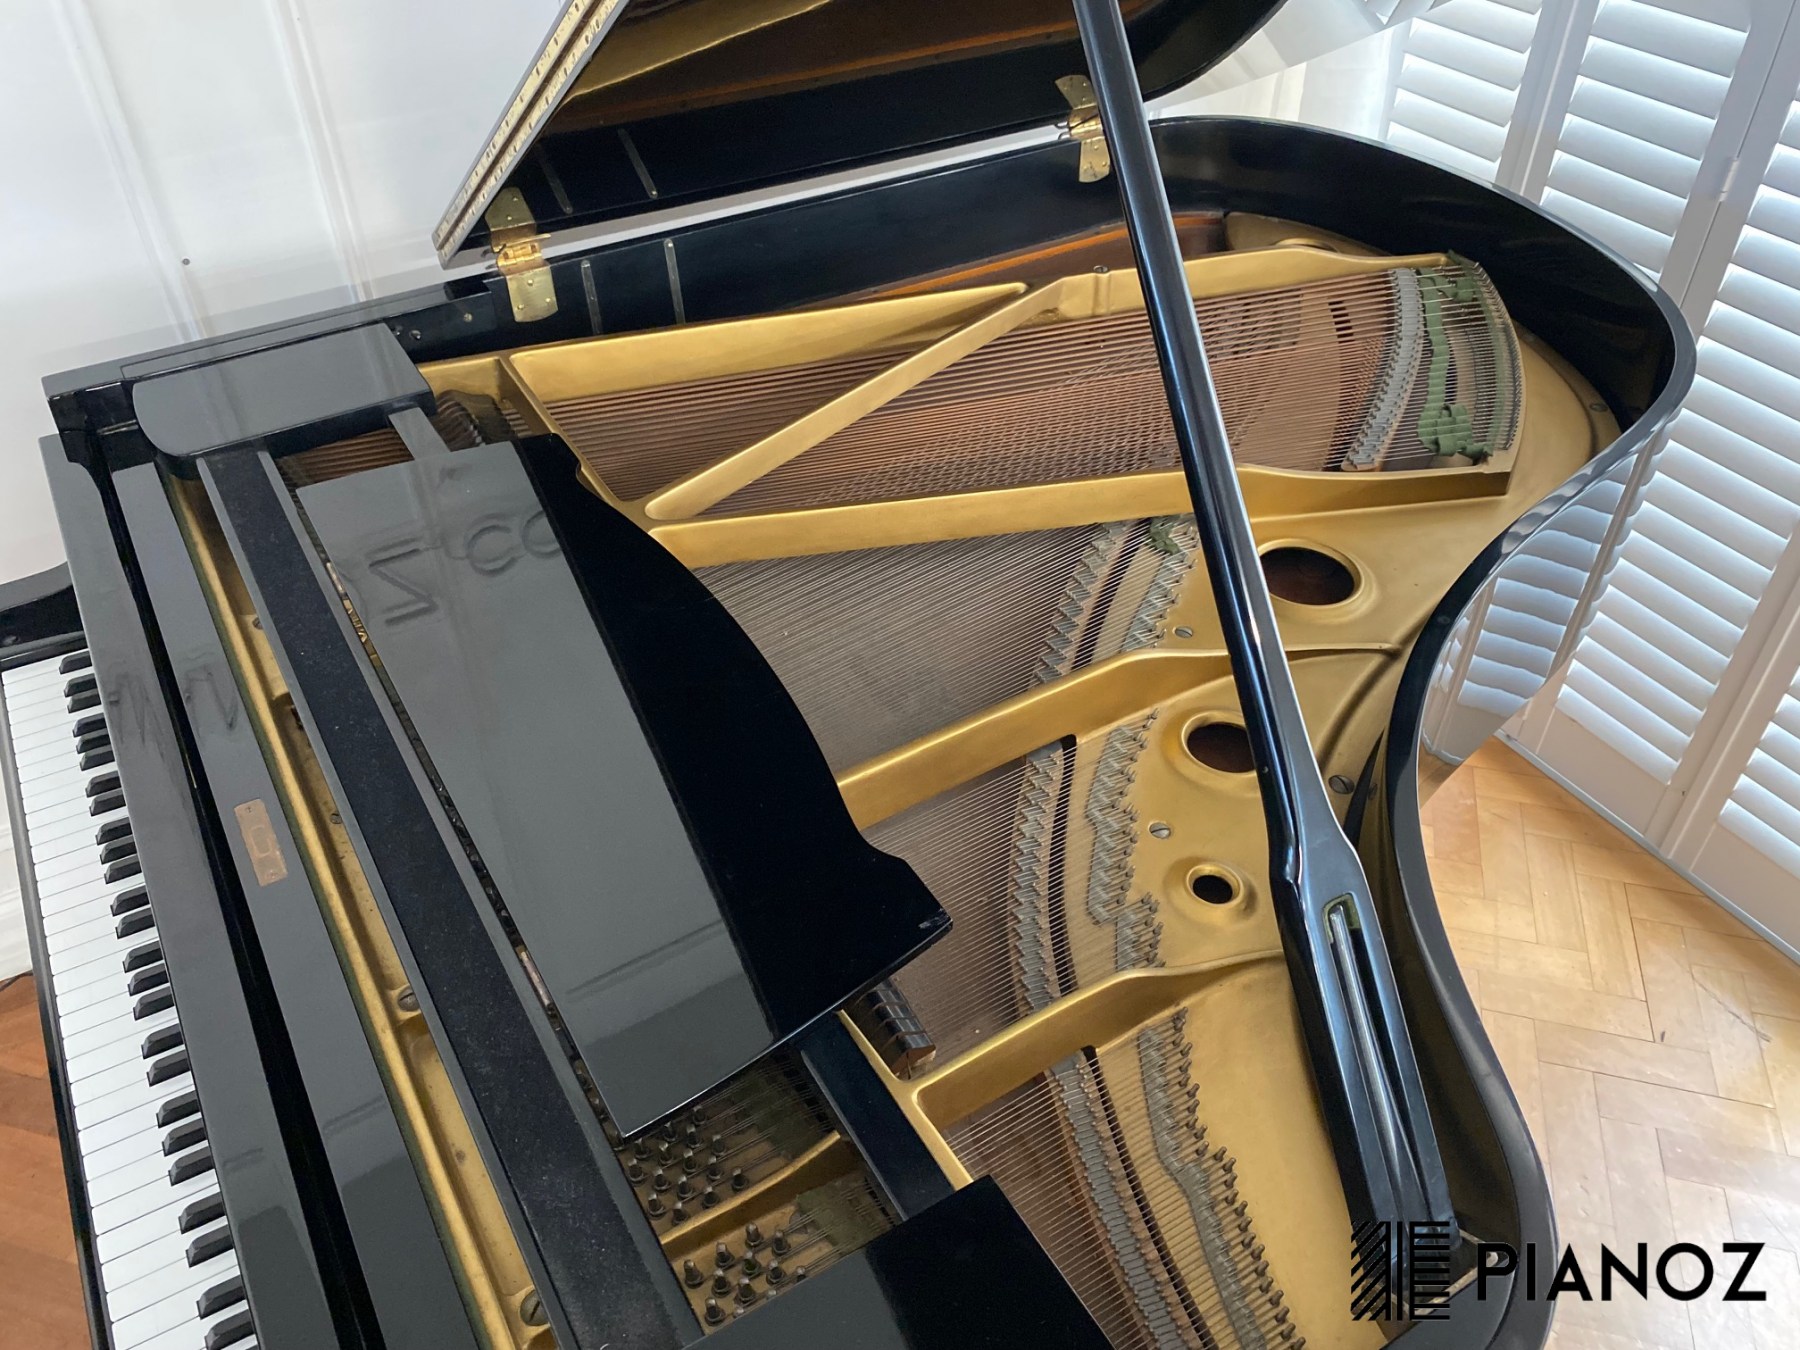 Yamaha G3 (C3) Japanese Grand Piano piano for sale in UK